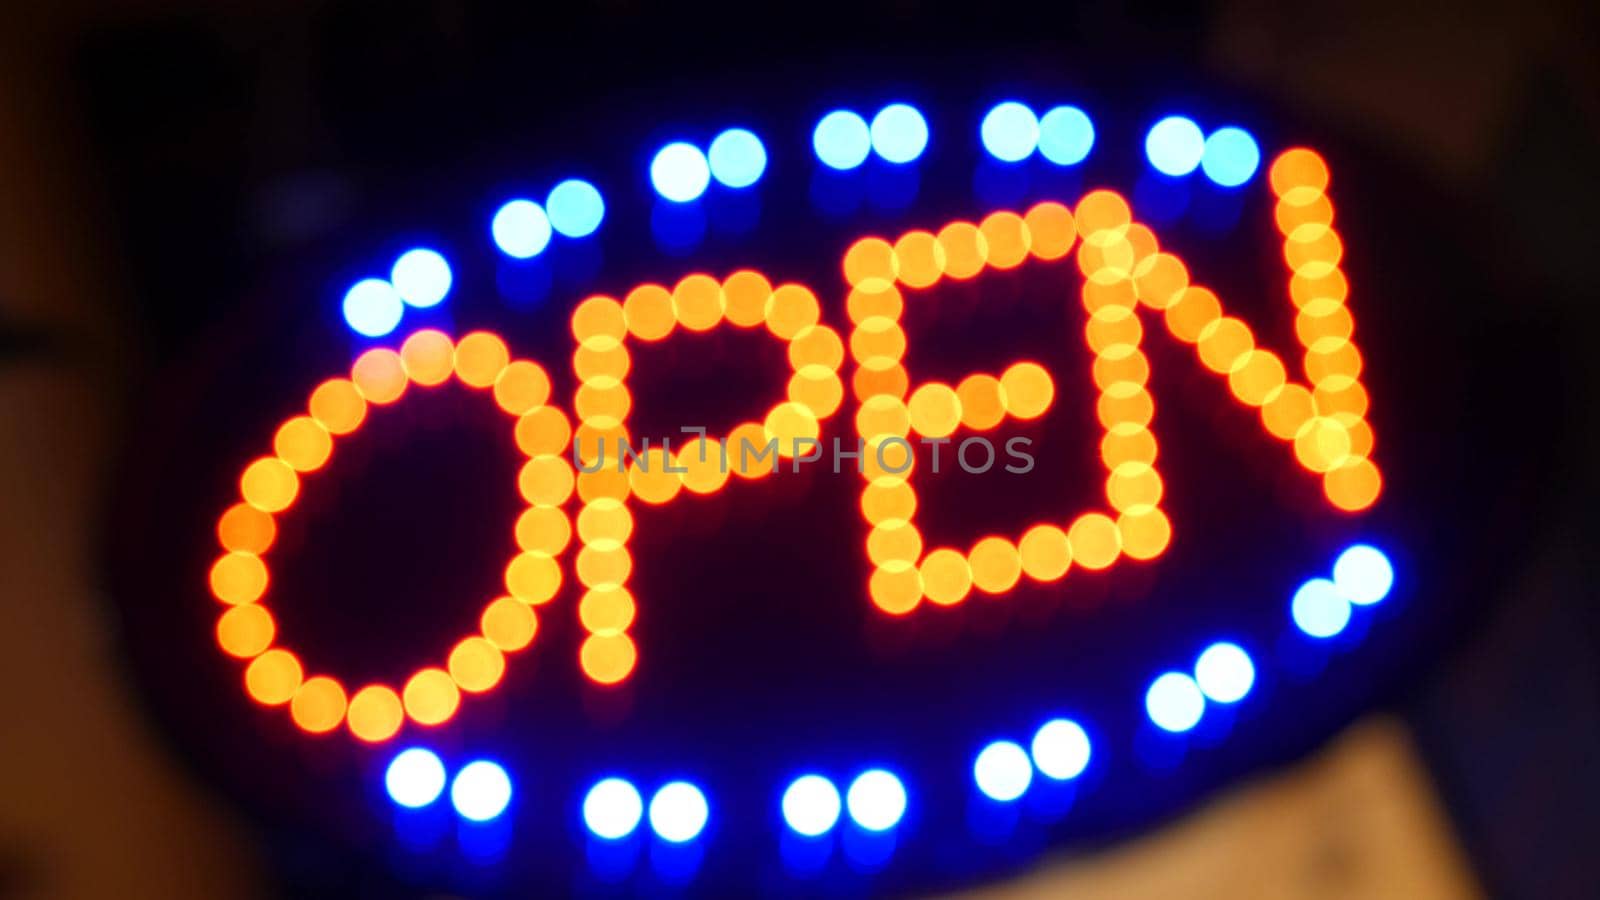 Open neon sign glowing in the dark. Vivid retro styled text at entrance on glass window. Colorful electric banner selective focus close up. Light bulbs radiance at night. Shiny illuminated lettering by DogoraSun